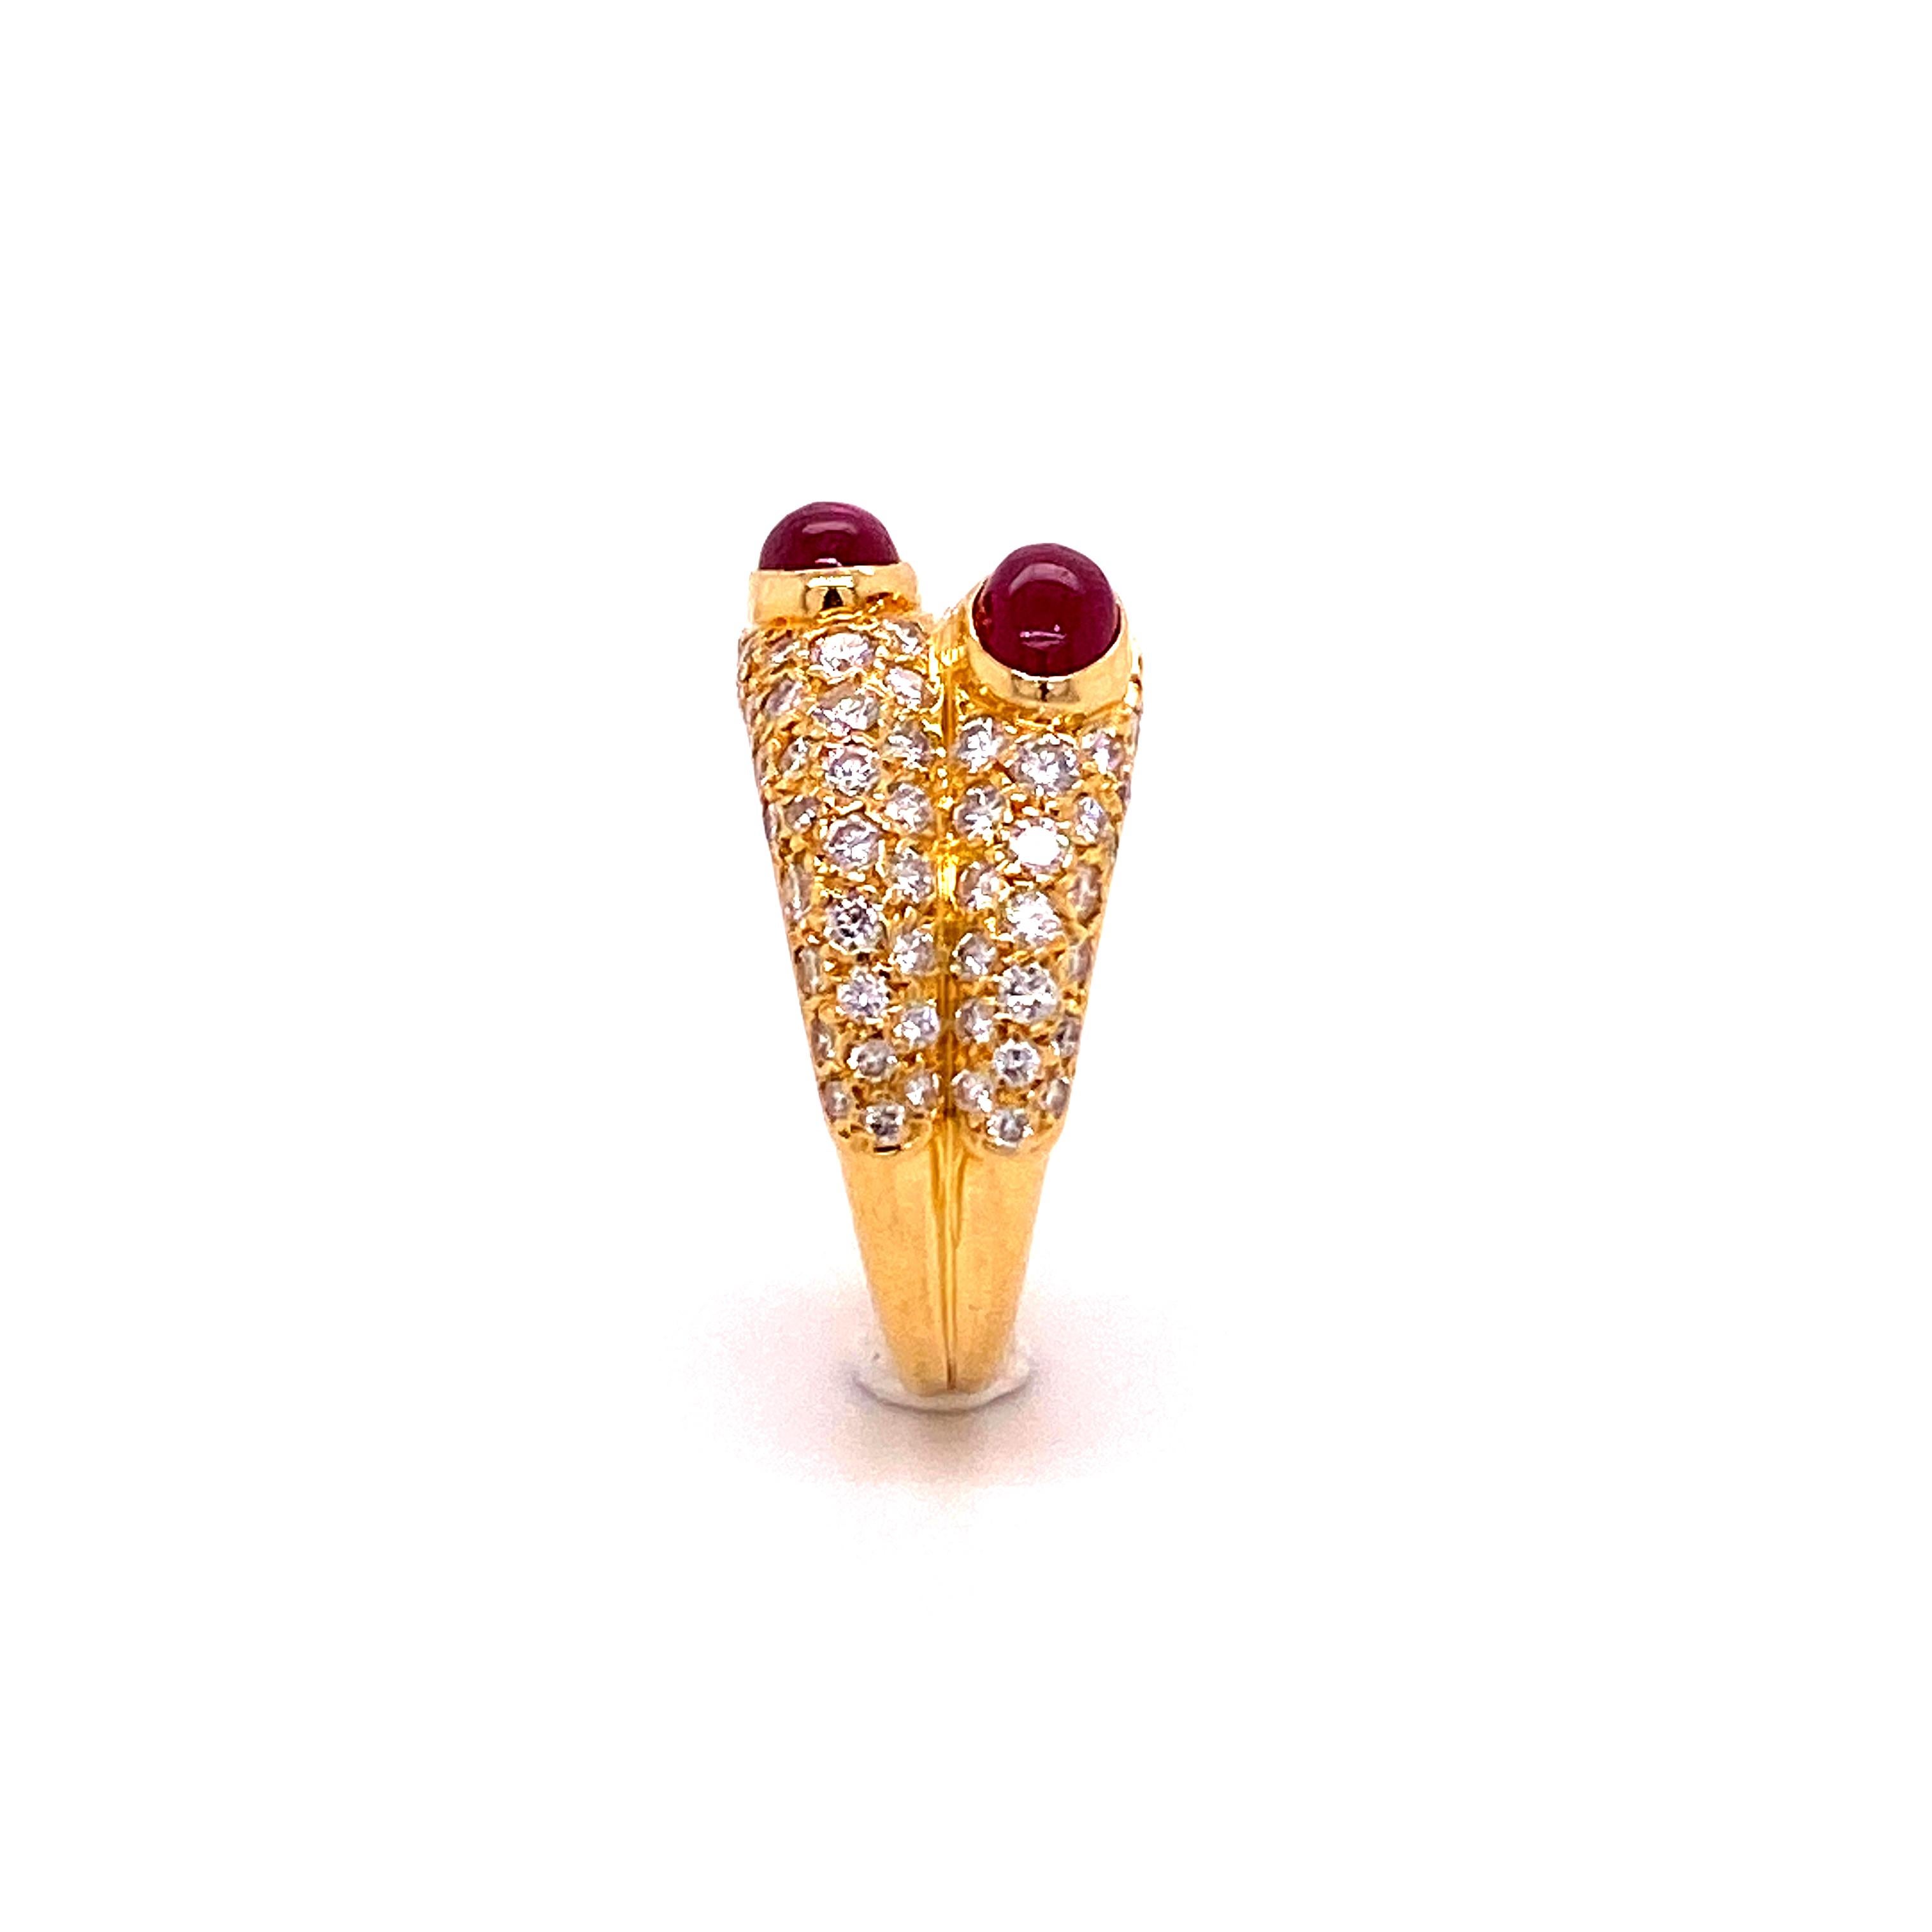 Cartier Ruby and Diamond Ring in 18 Karat Yellow Gold 2